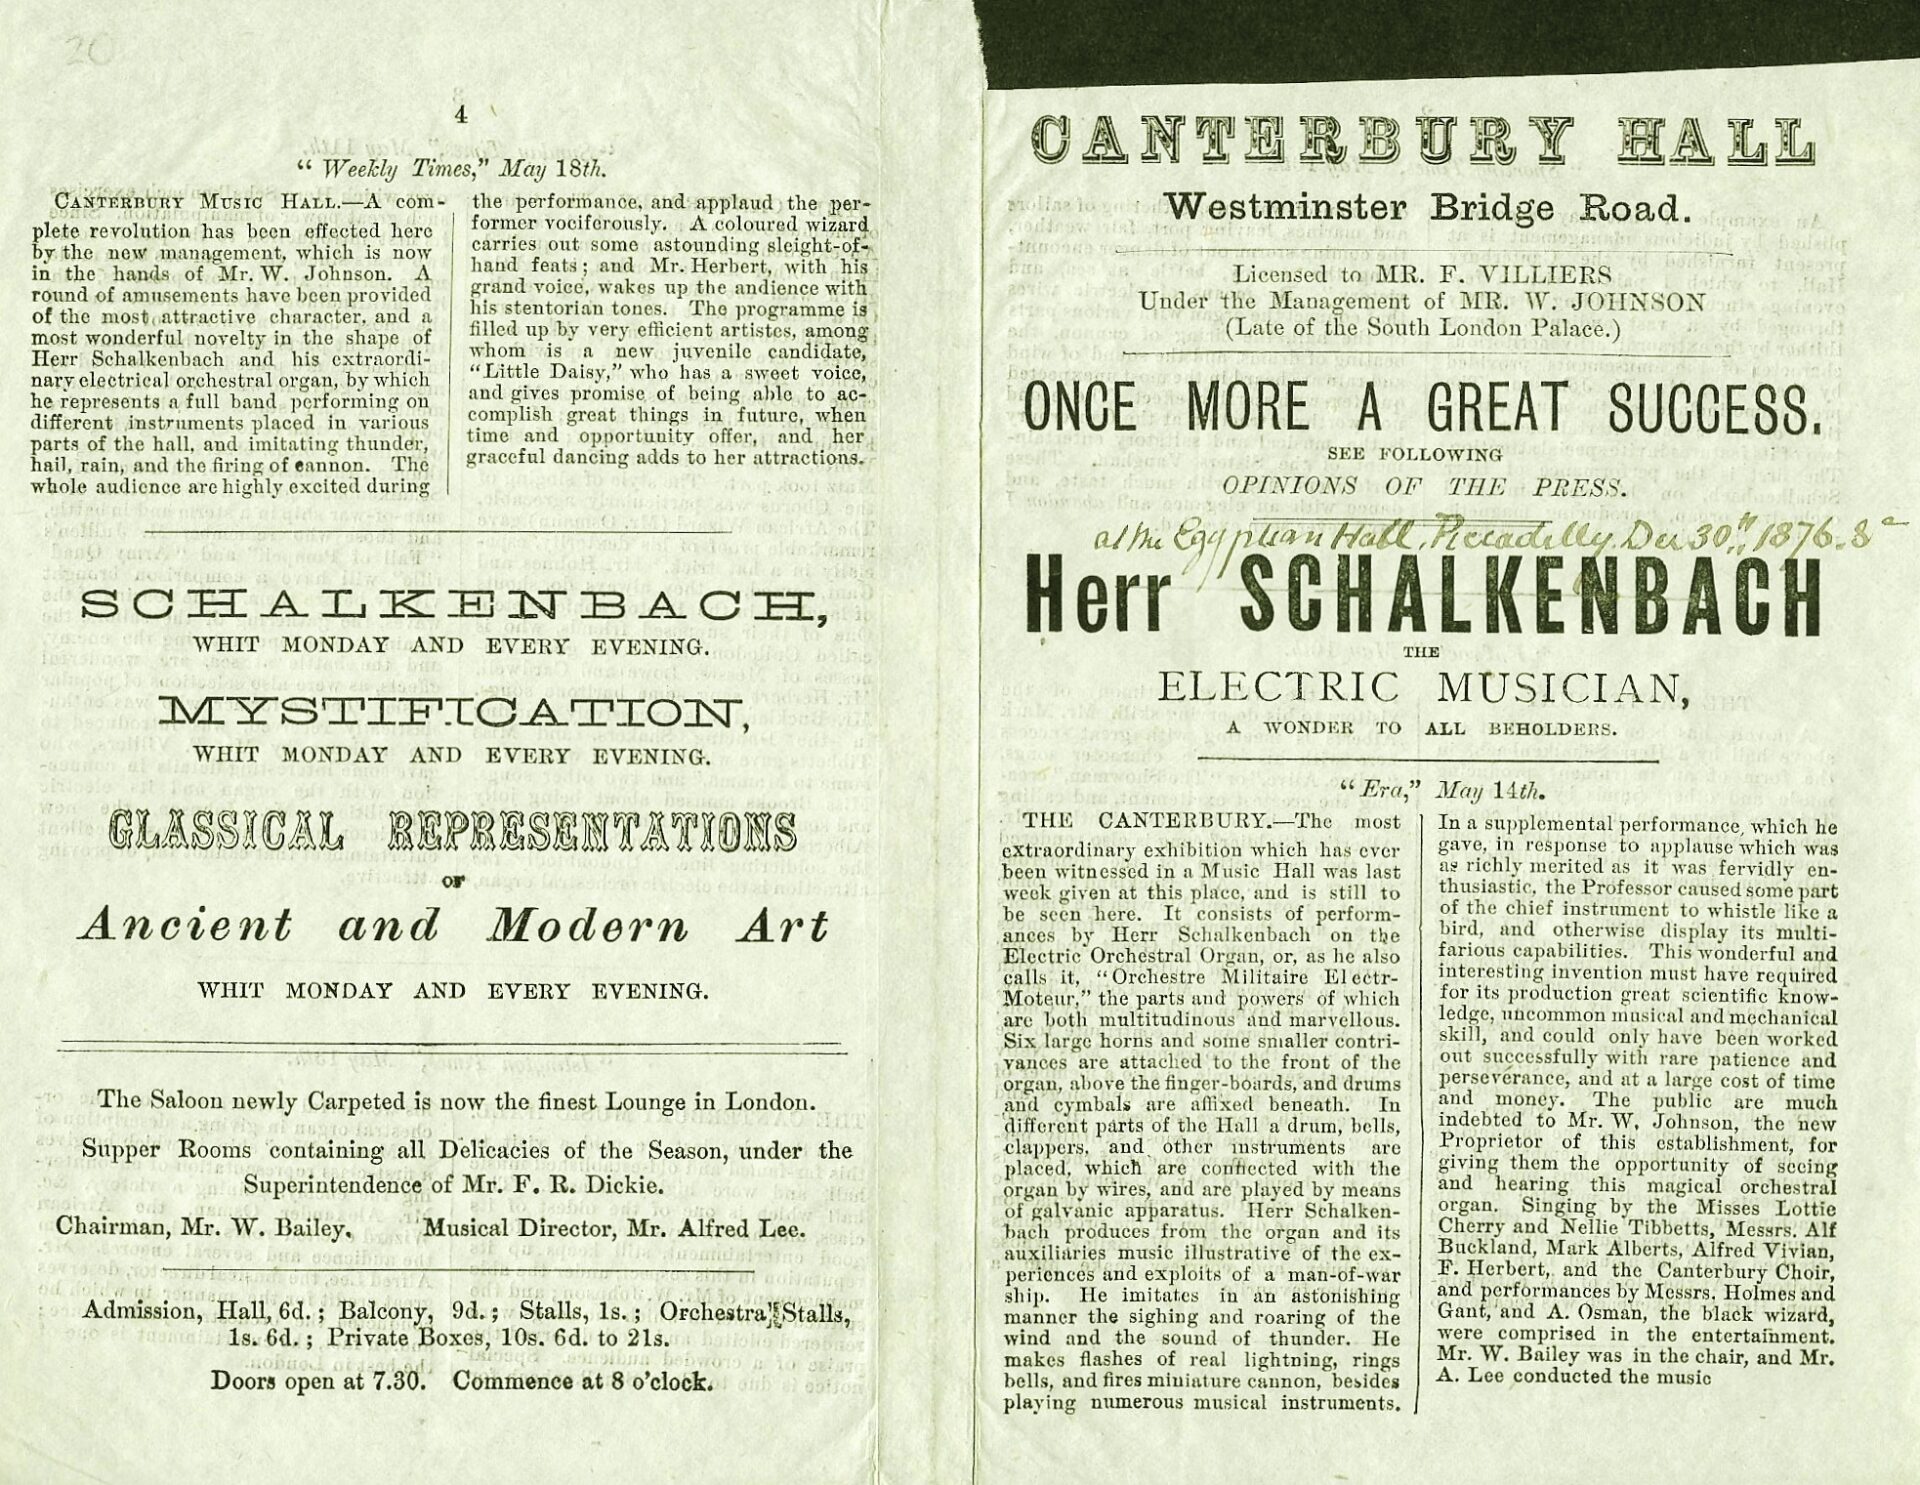 Herr Schalkenbach promotional item containing reviews of an 1873 performance at the Canterbury Hall